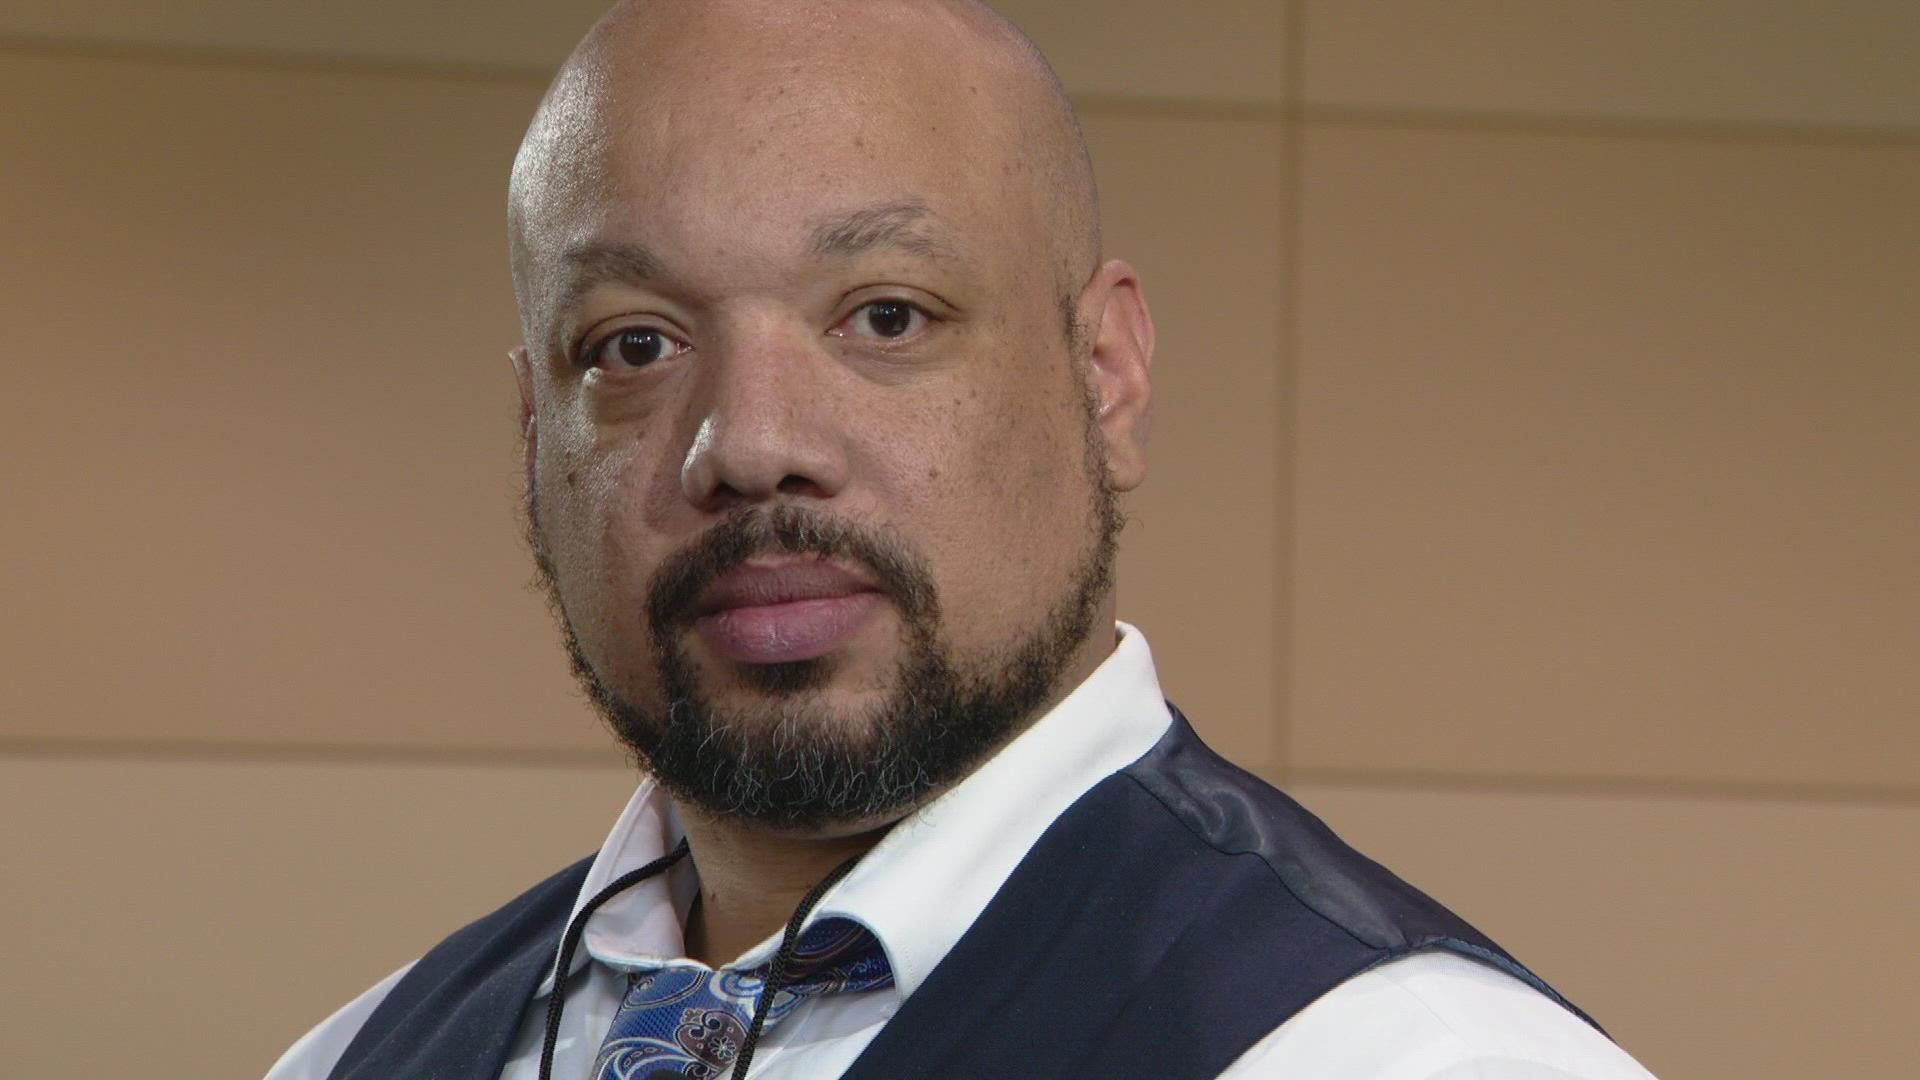 9NEWS Reporter Courtney Yuen talked with Curtis Brooks, a man who served 24 years in prison for a crime he was a part of at the age of 15. He hopes to inspire youth.